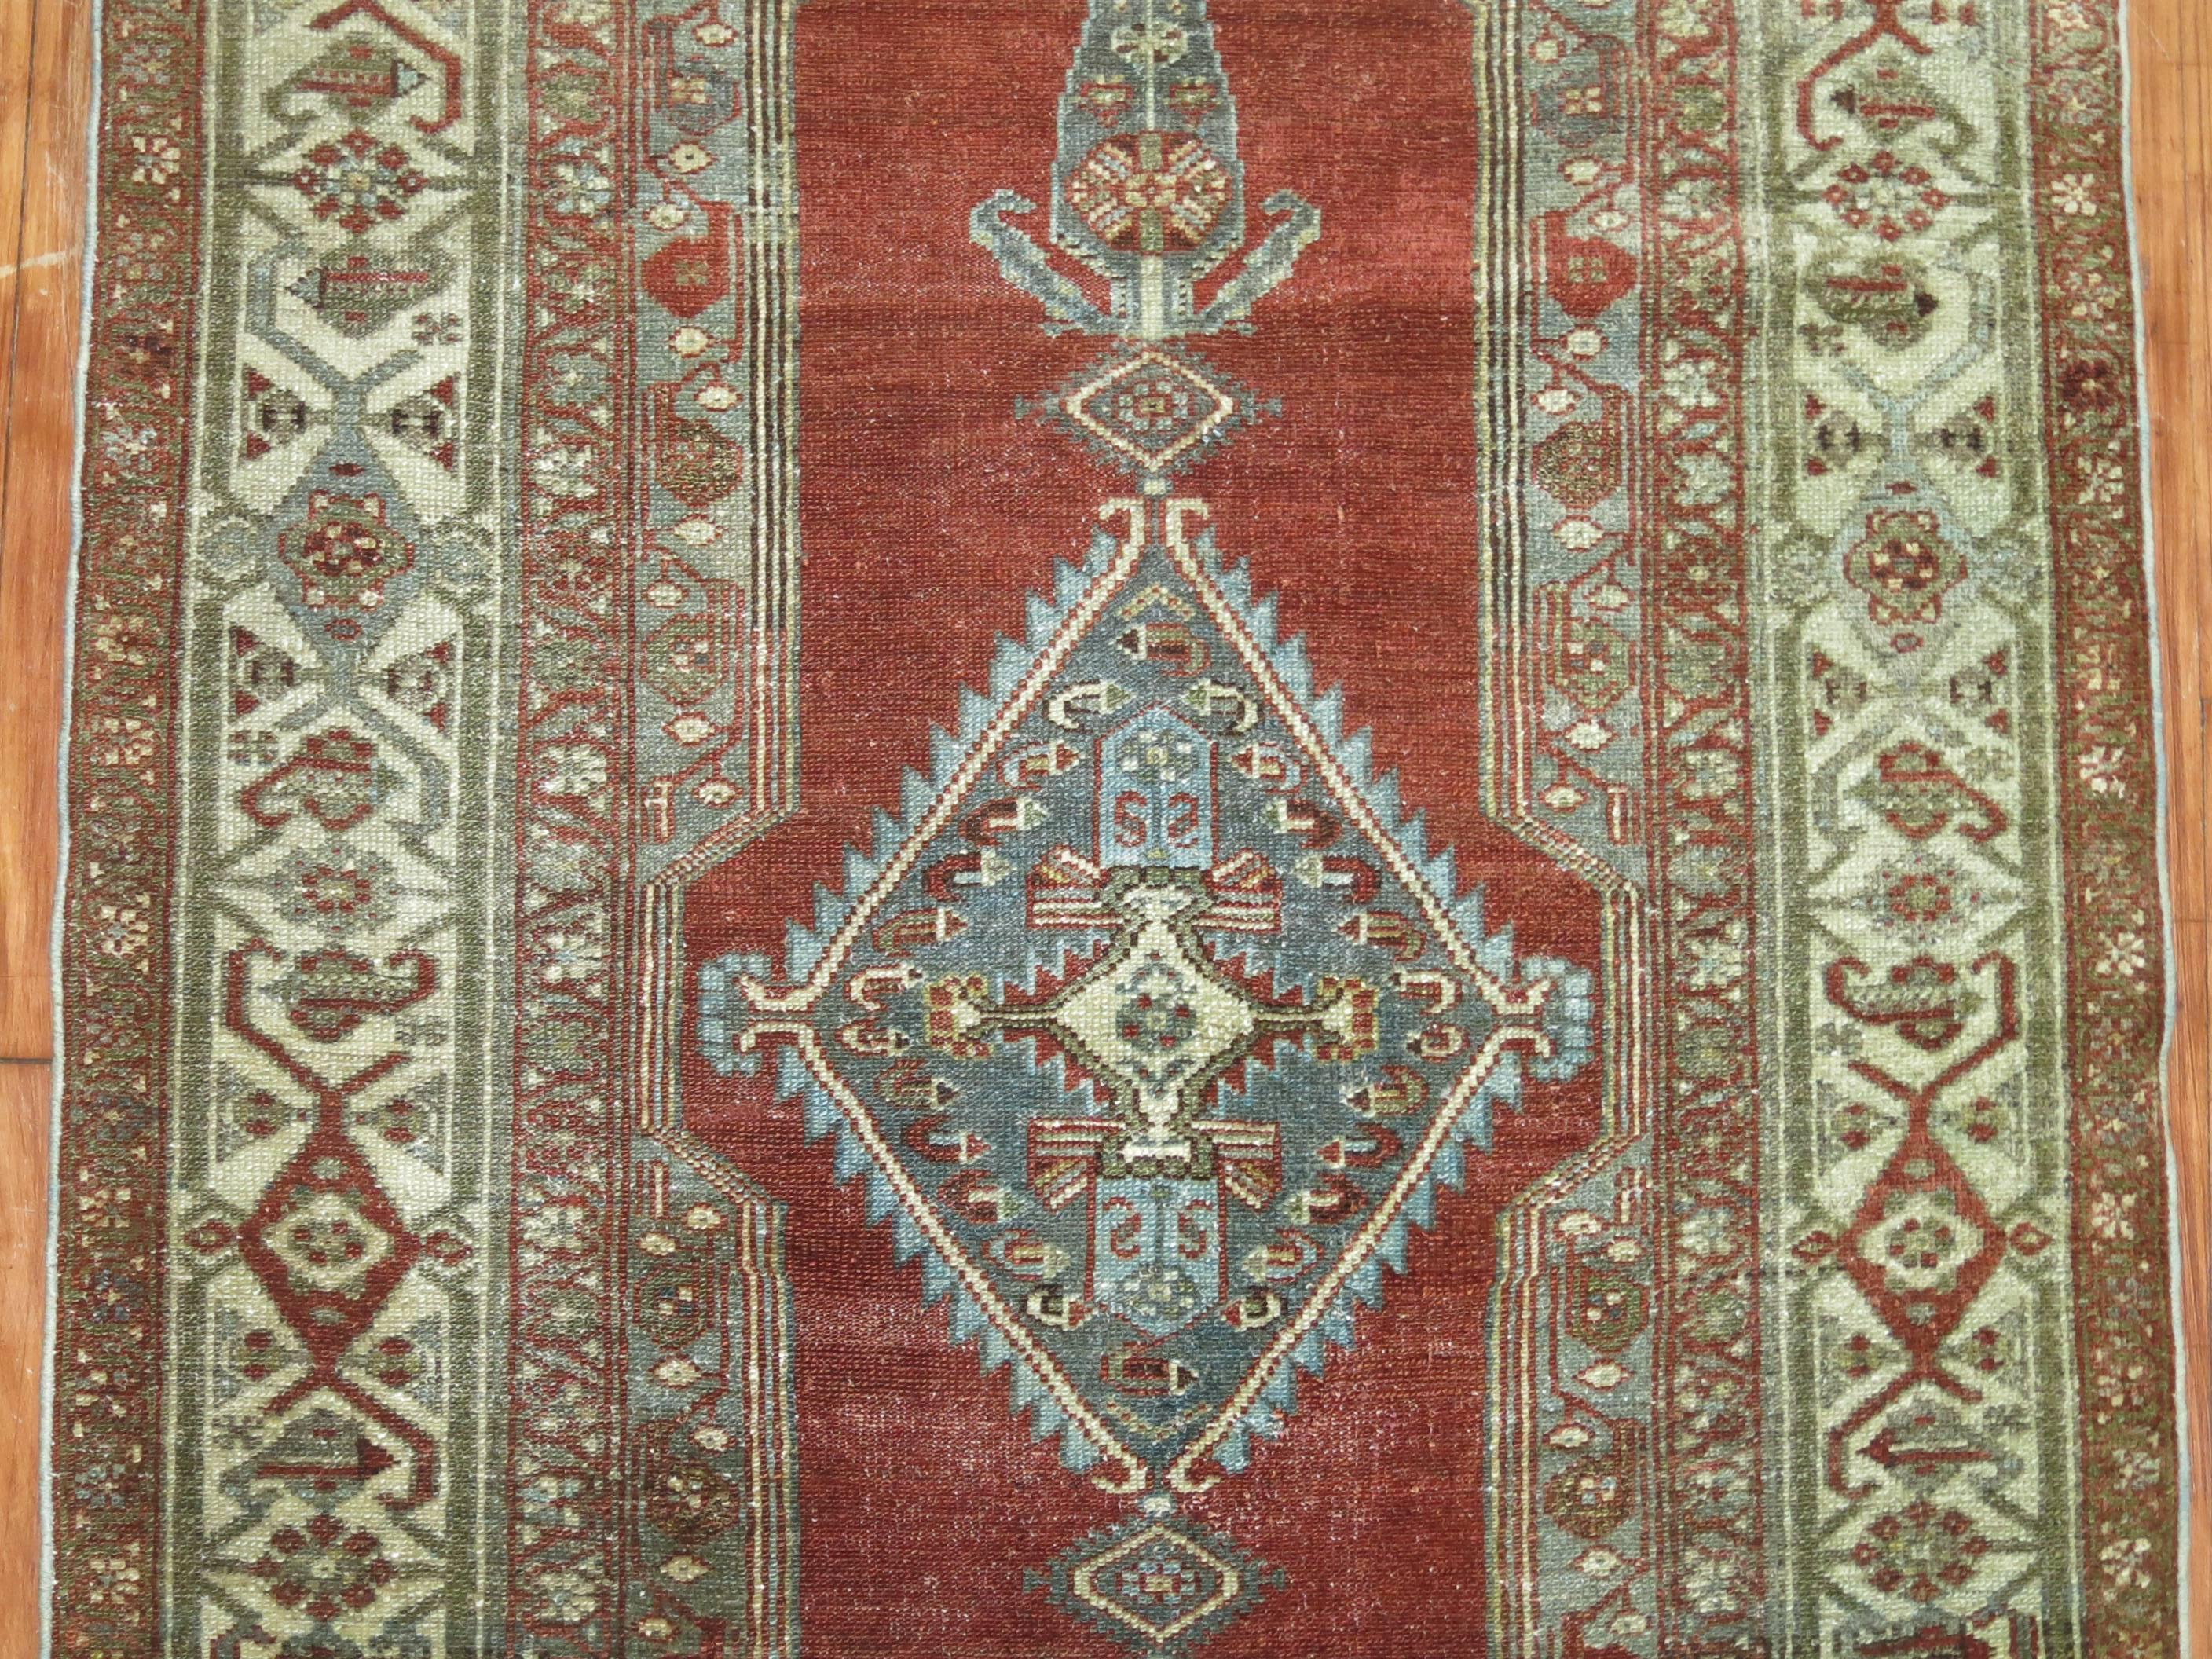 An early 20th century Persian Malayer rug with a brown rust field accents in gray, blue and green,

circa 1930, measures: 3'3